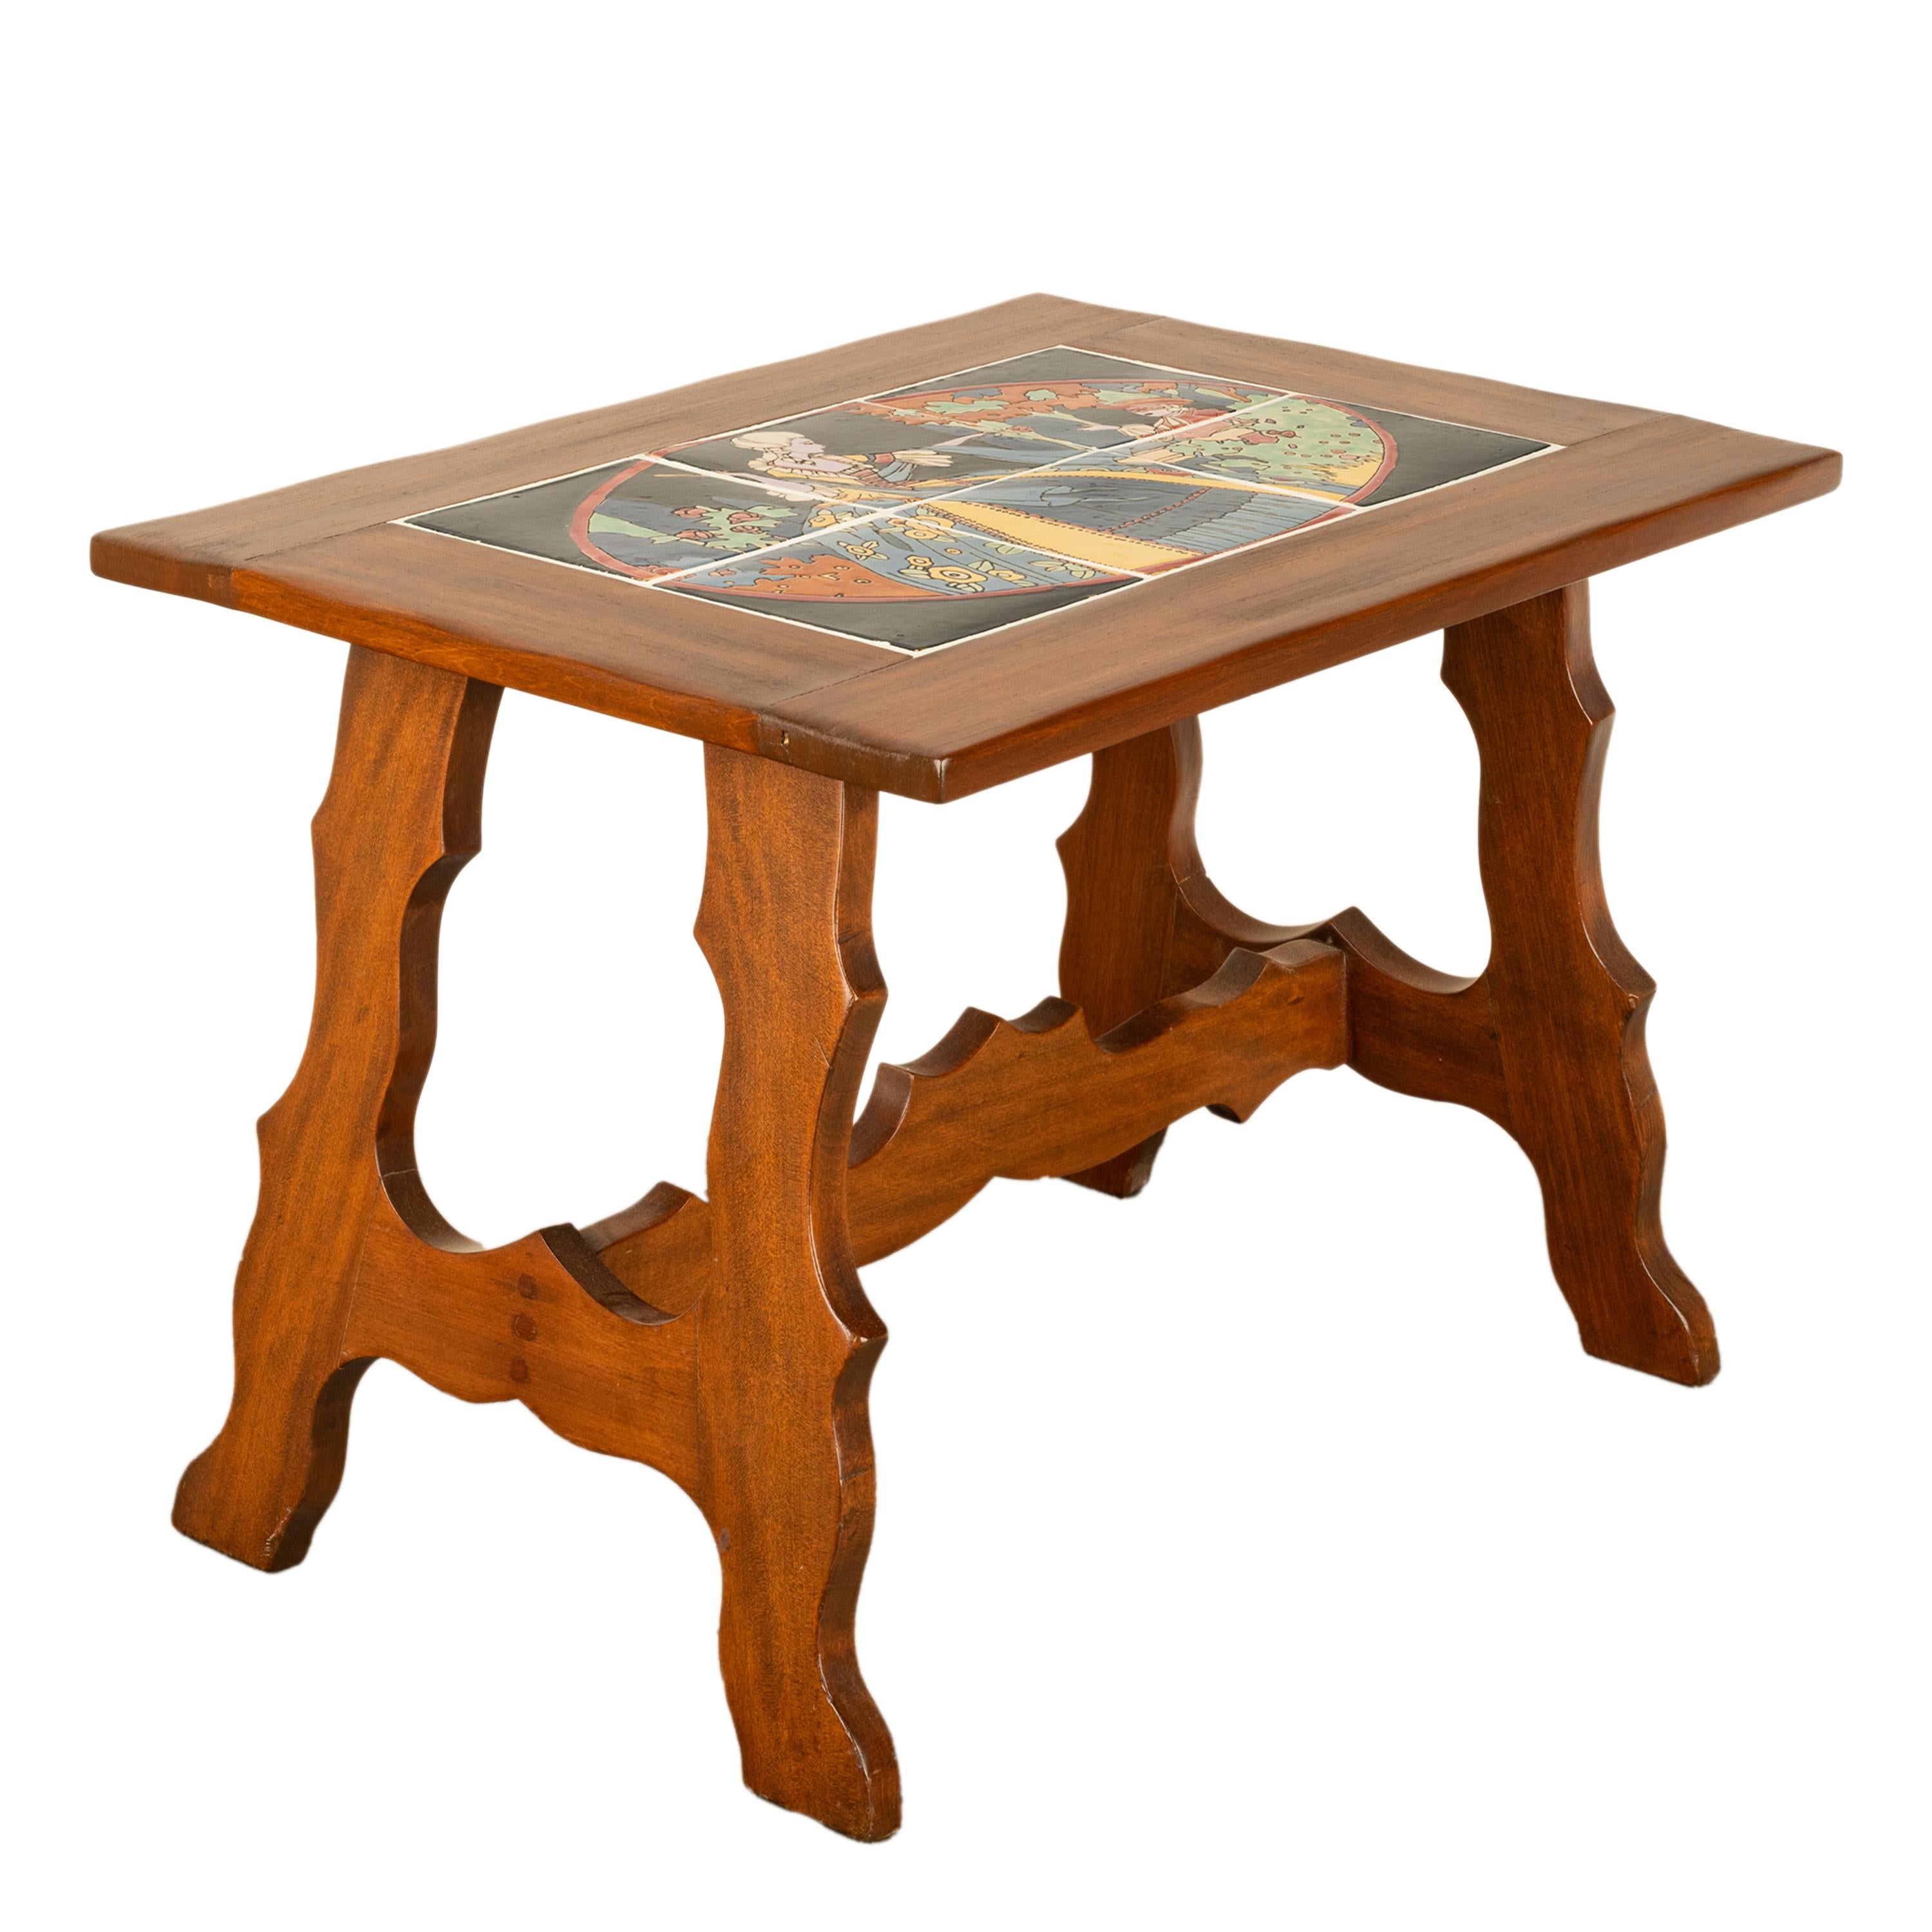 An unusual antique California Monterey Catalina tile topped walnut coffee/side table, circa 1930.
A wonderful walnut table inlaid with brightly glazed tiles from the Catalina Tile Company and dating to the late 1920s. The brightly glazed frieze of